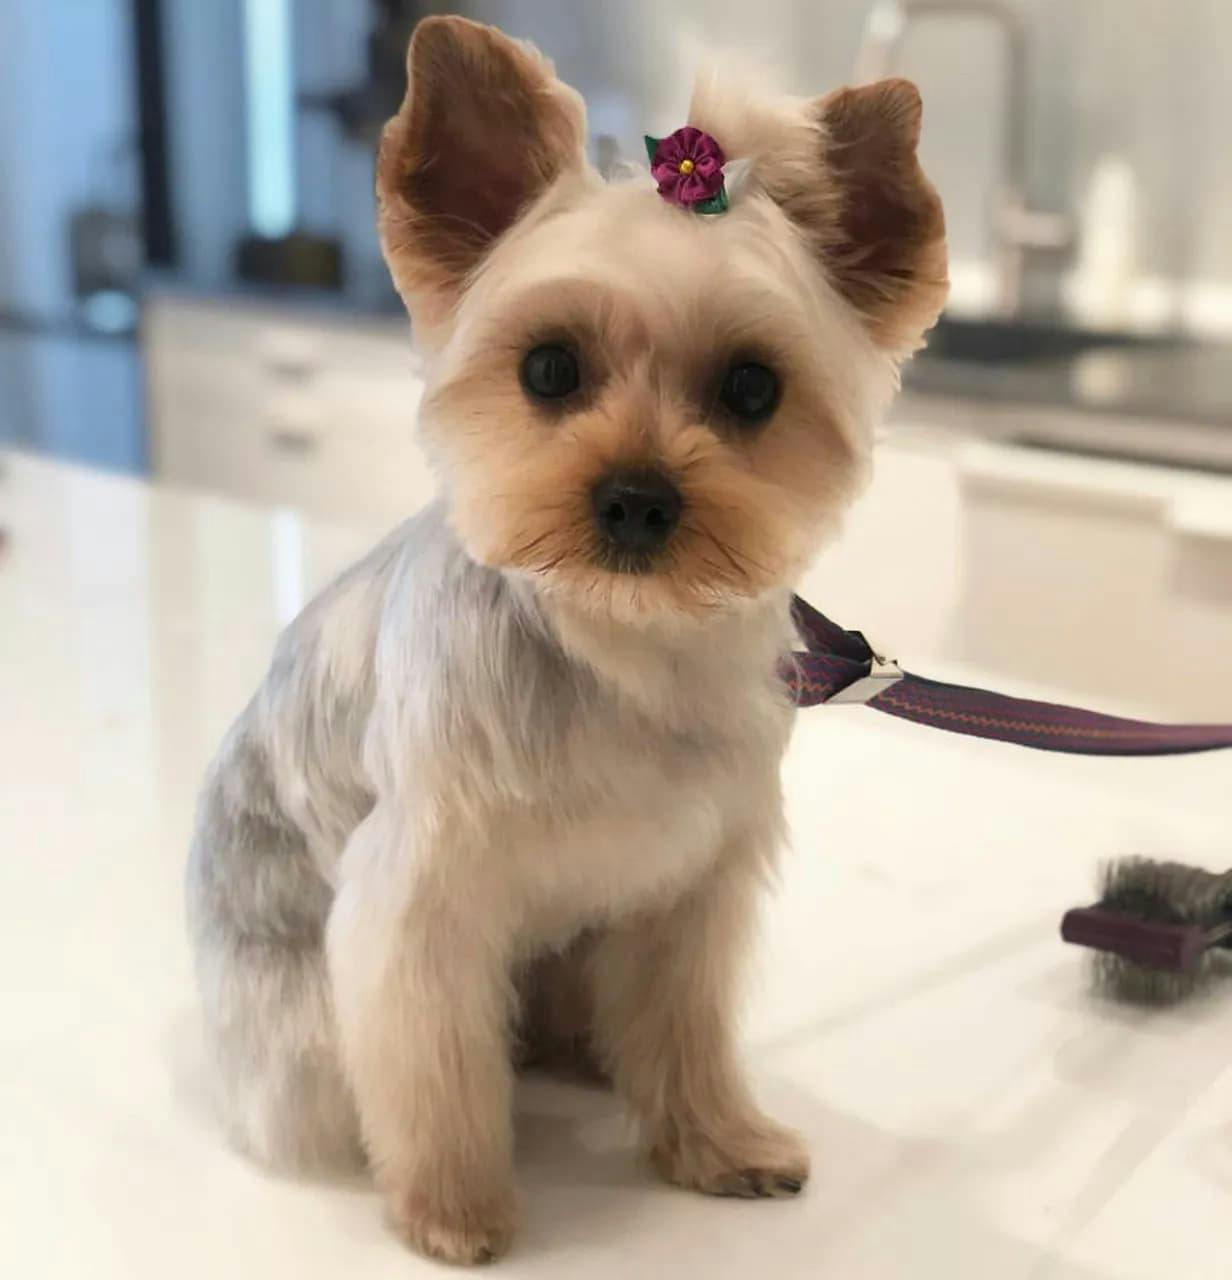 Pet Grooming 101 from @Styledby_Alli: Tips and Tricks for Keeping Your Pet Looking and Feeling Their Best